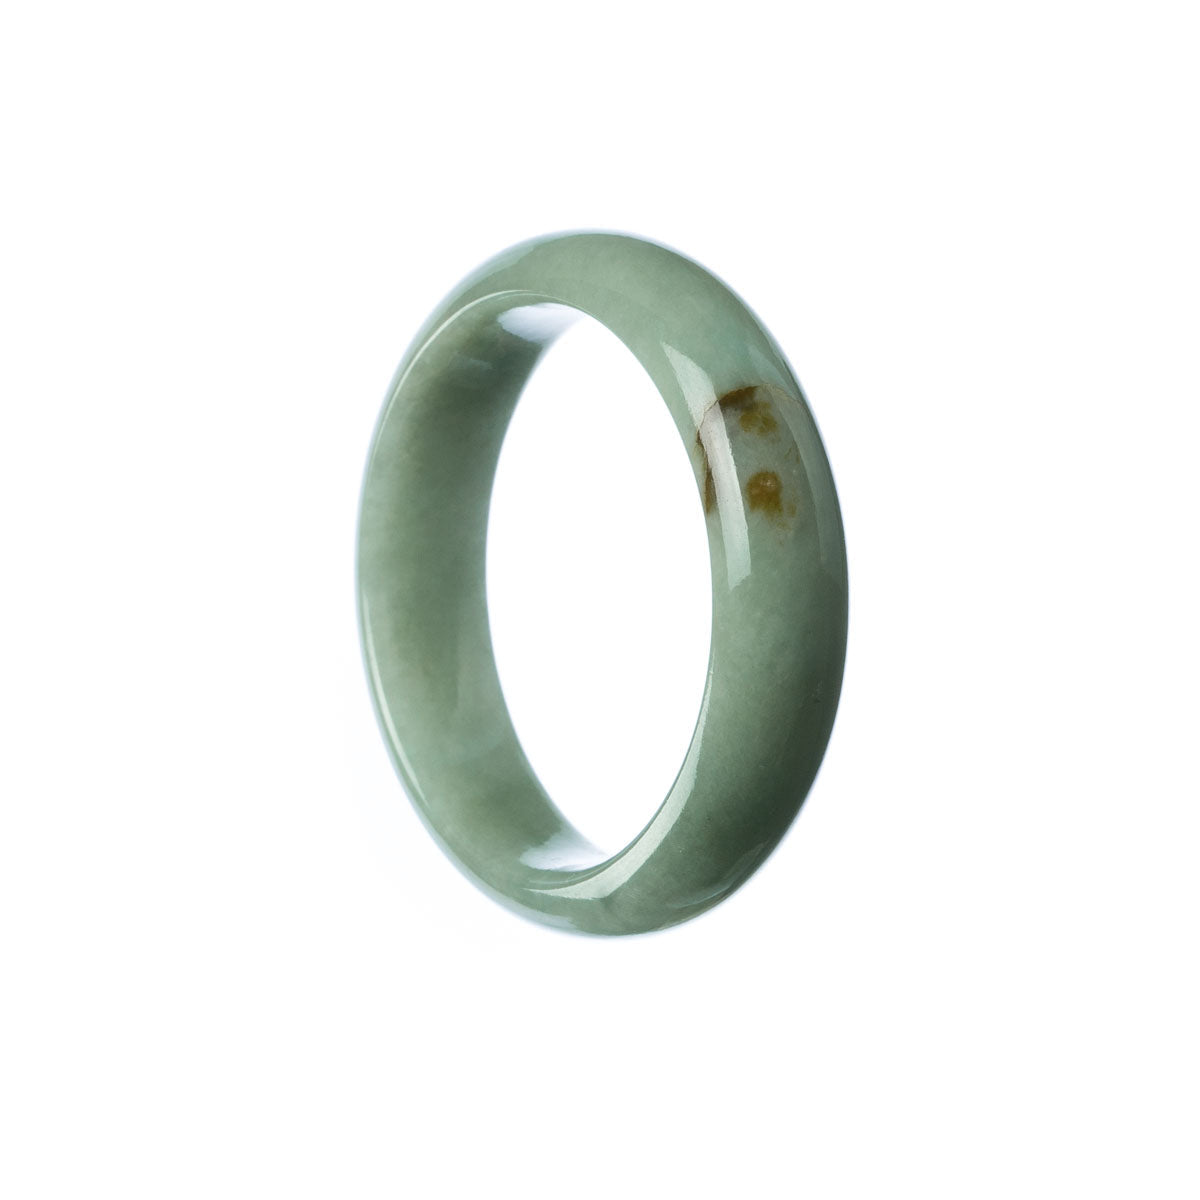 A half moon-shaped green jadeite bangle bracelet, perfectly sized for children, made from genuine Grade A jadeite. A beautiful and elegant accessory from the MAYS collection.